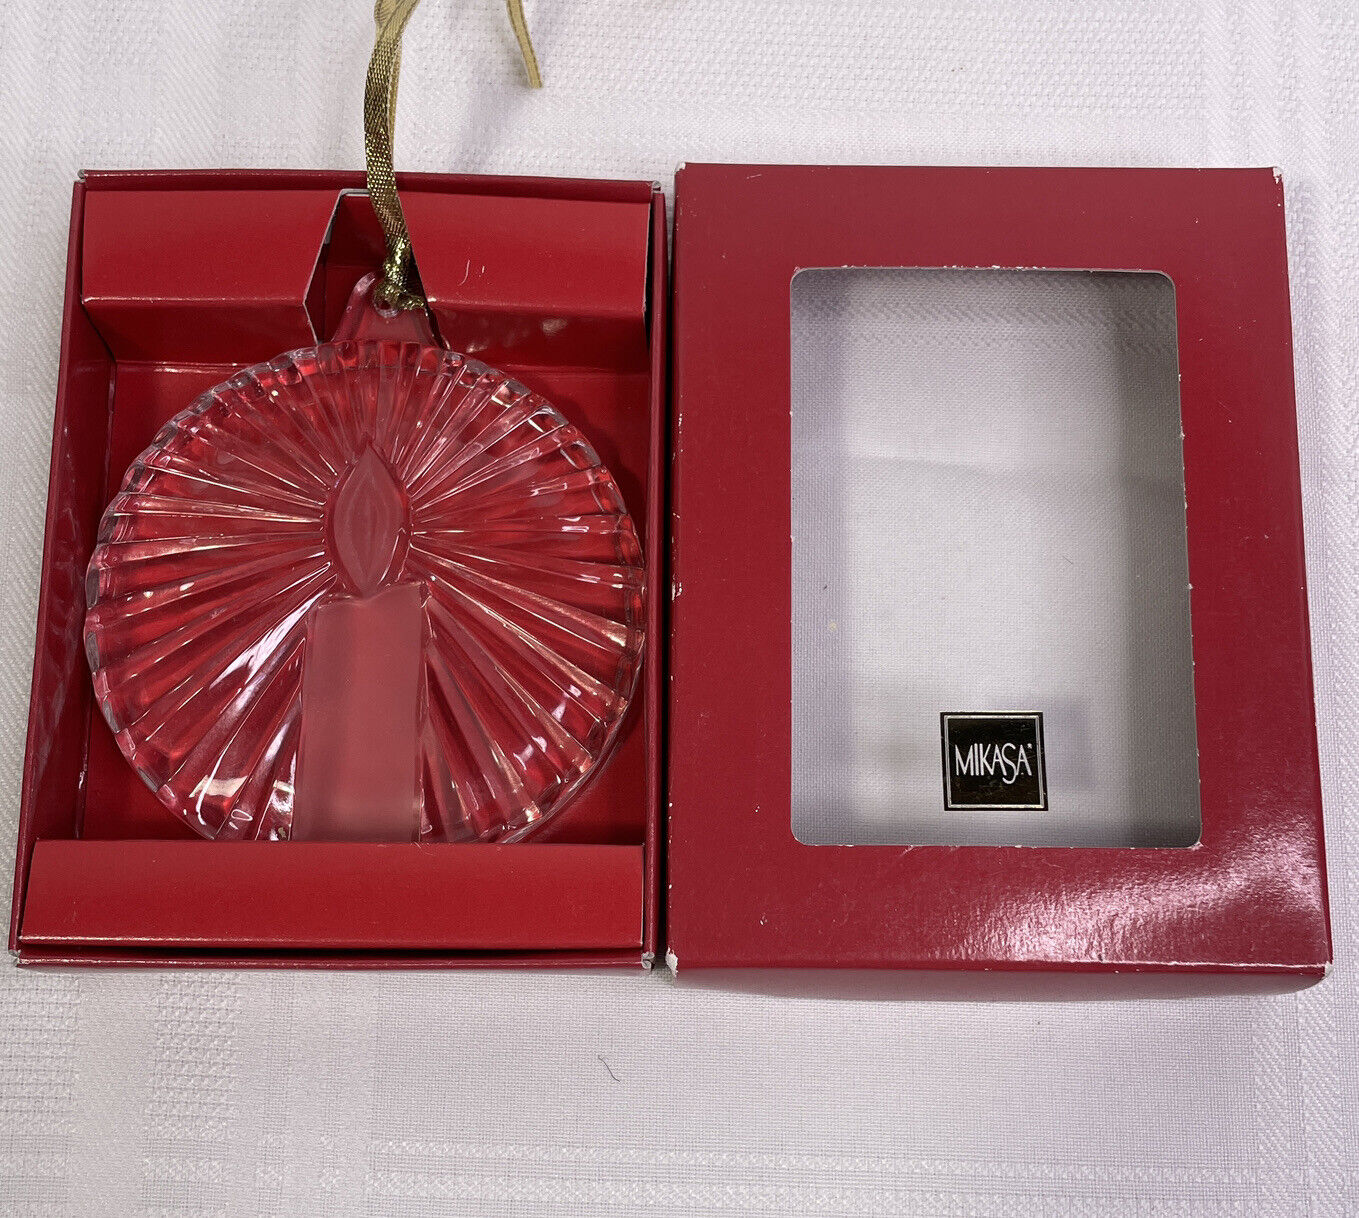 Mikasa Christmas Noel Candle Ornament Round 3.25 inch Glass QQ190/525